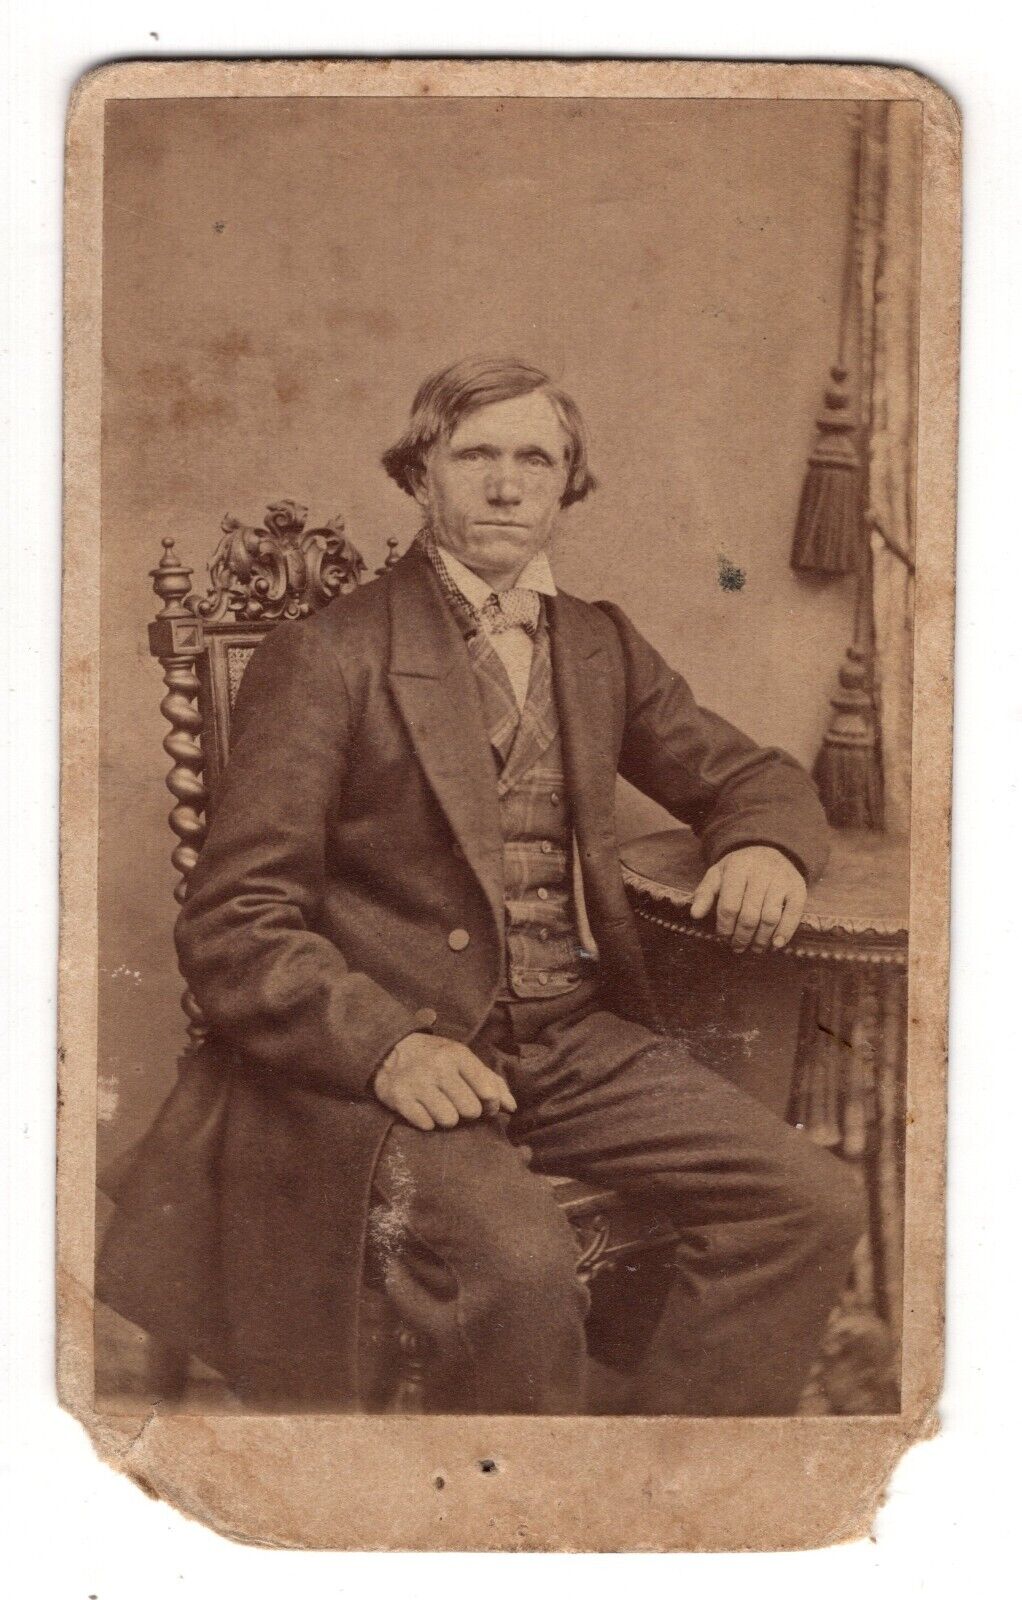 CIRCA 1870s CDV OLDER MAN IN SUIT DETAILED UNMARKED